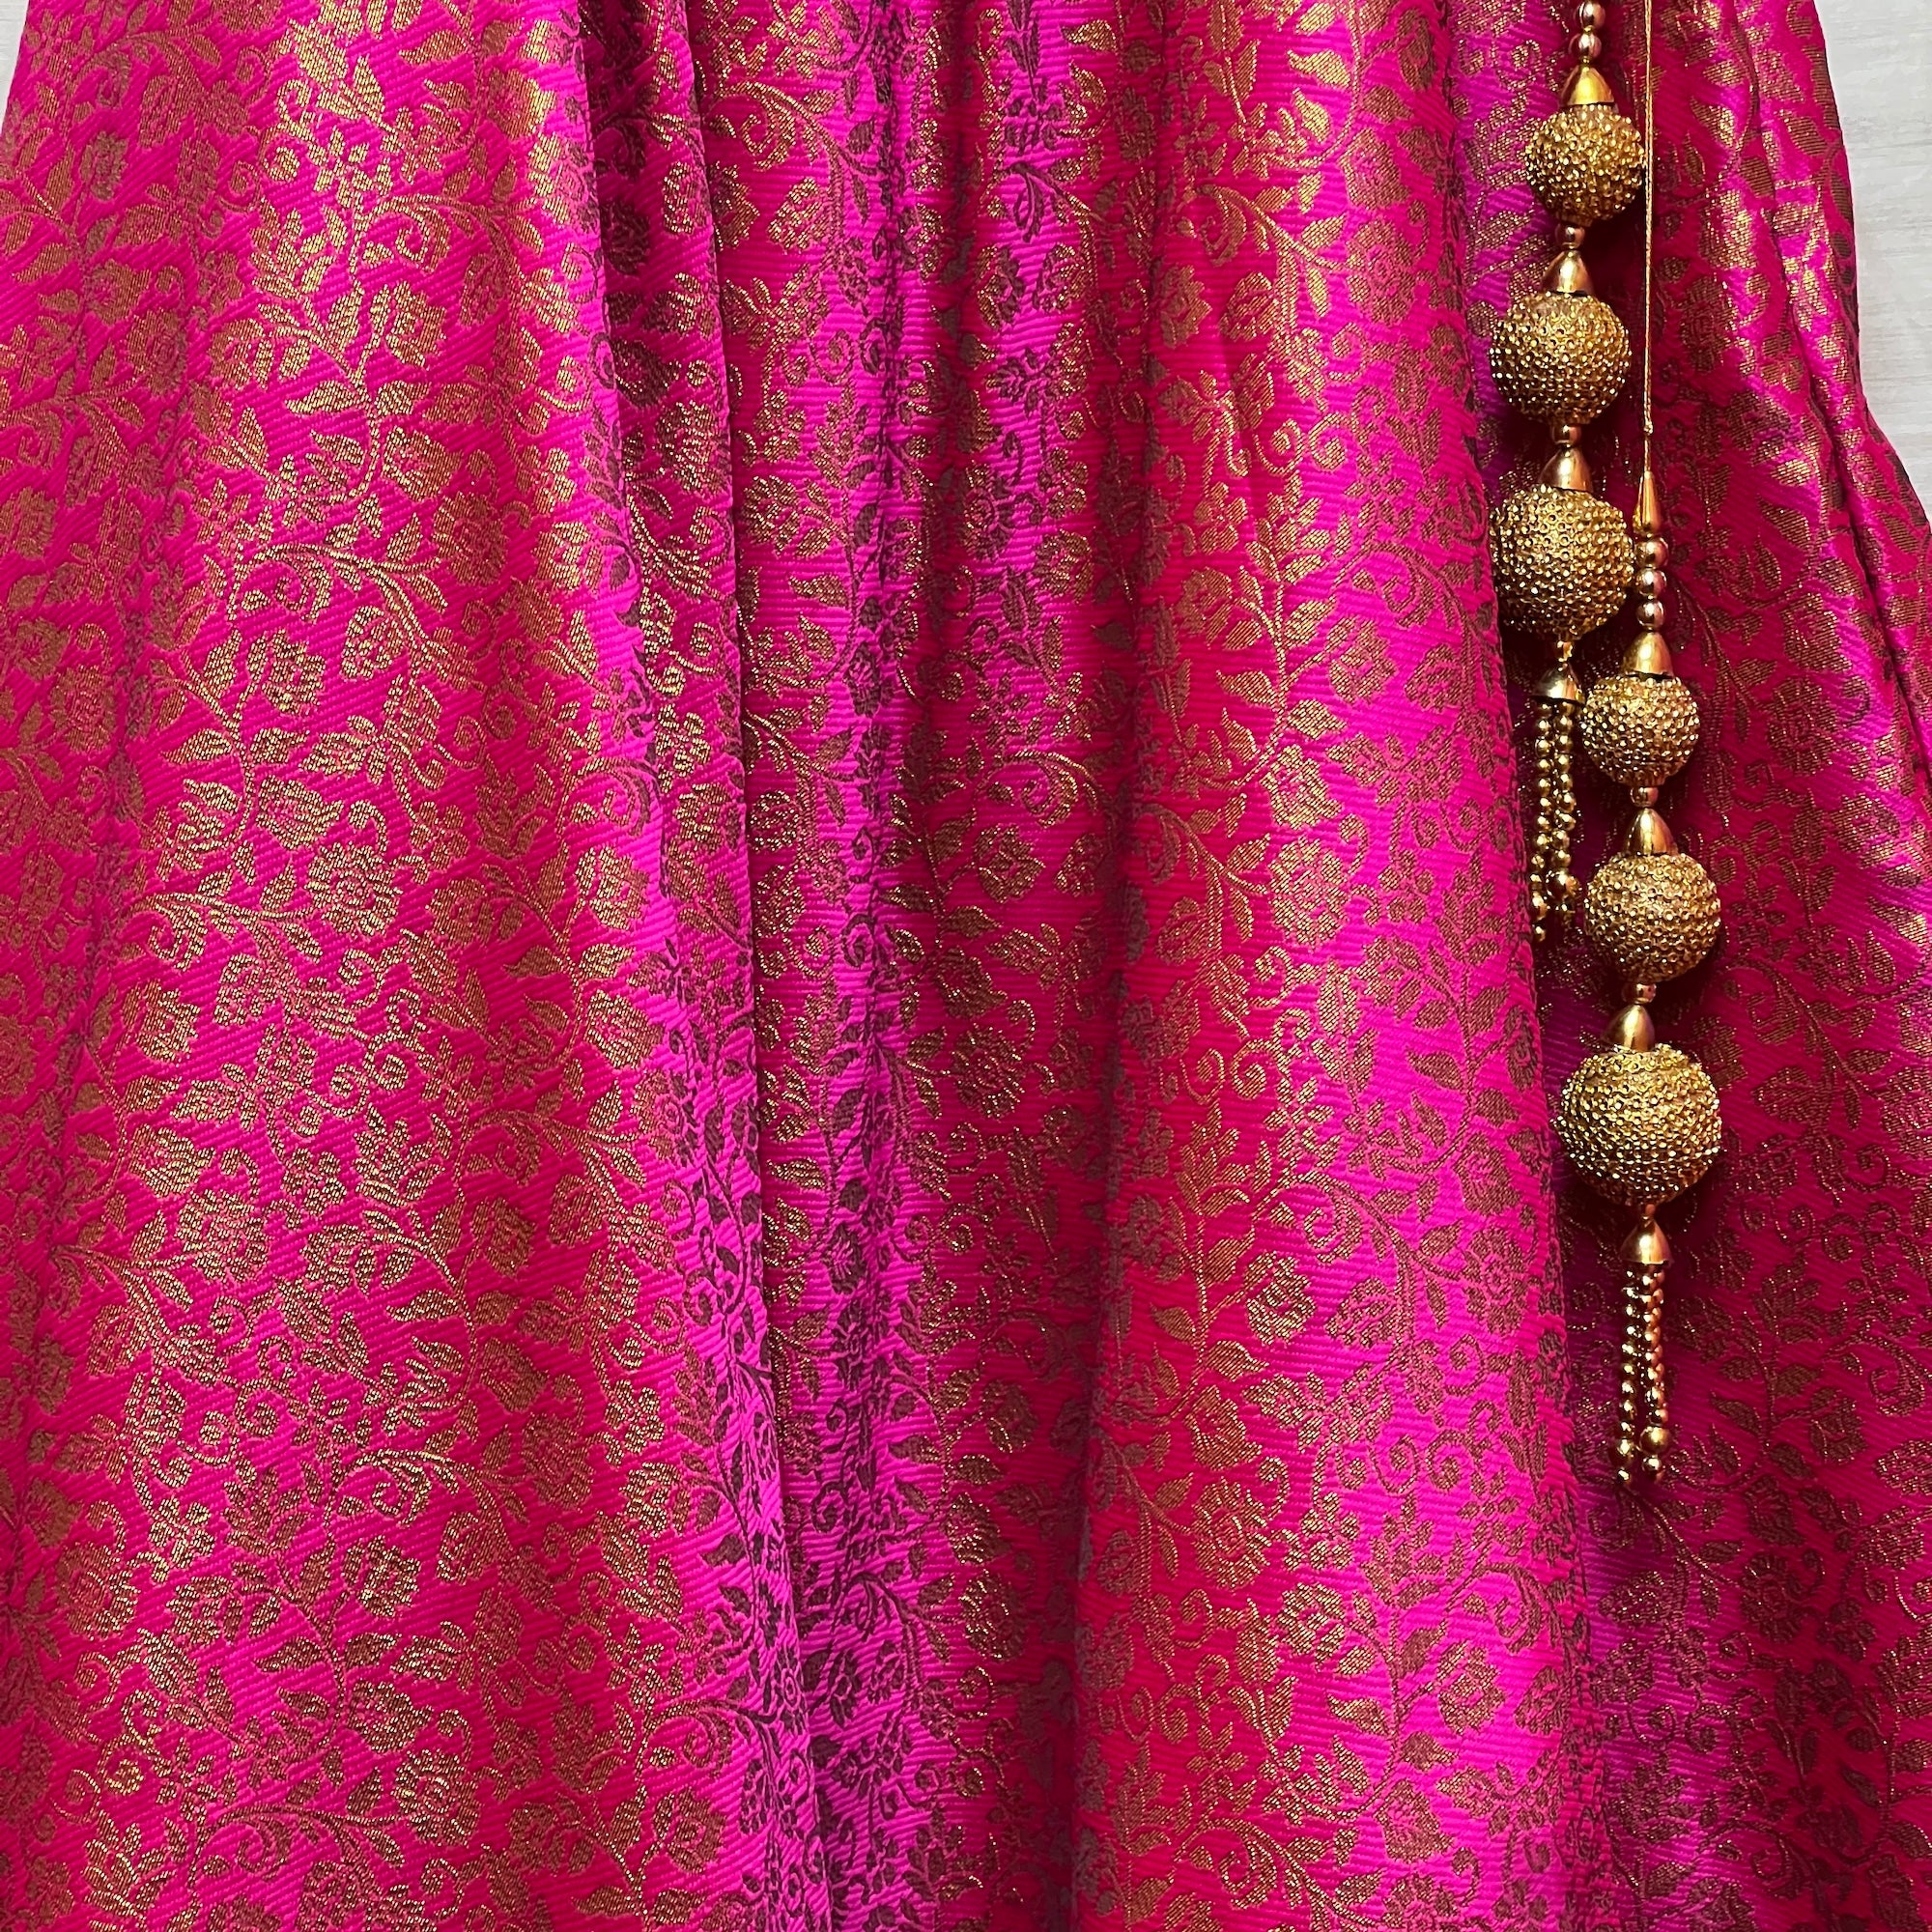 DT Bright Pink Brocade Floral Lehengas- 2 Styles/Lengths - Vintage India NYC